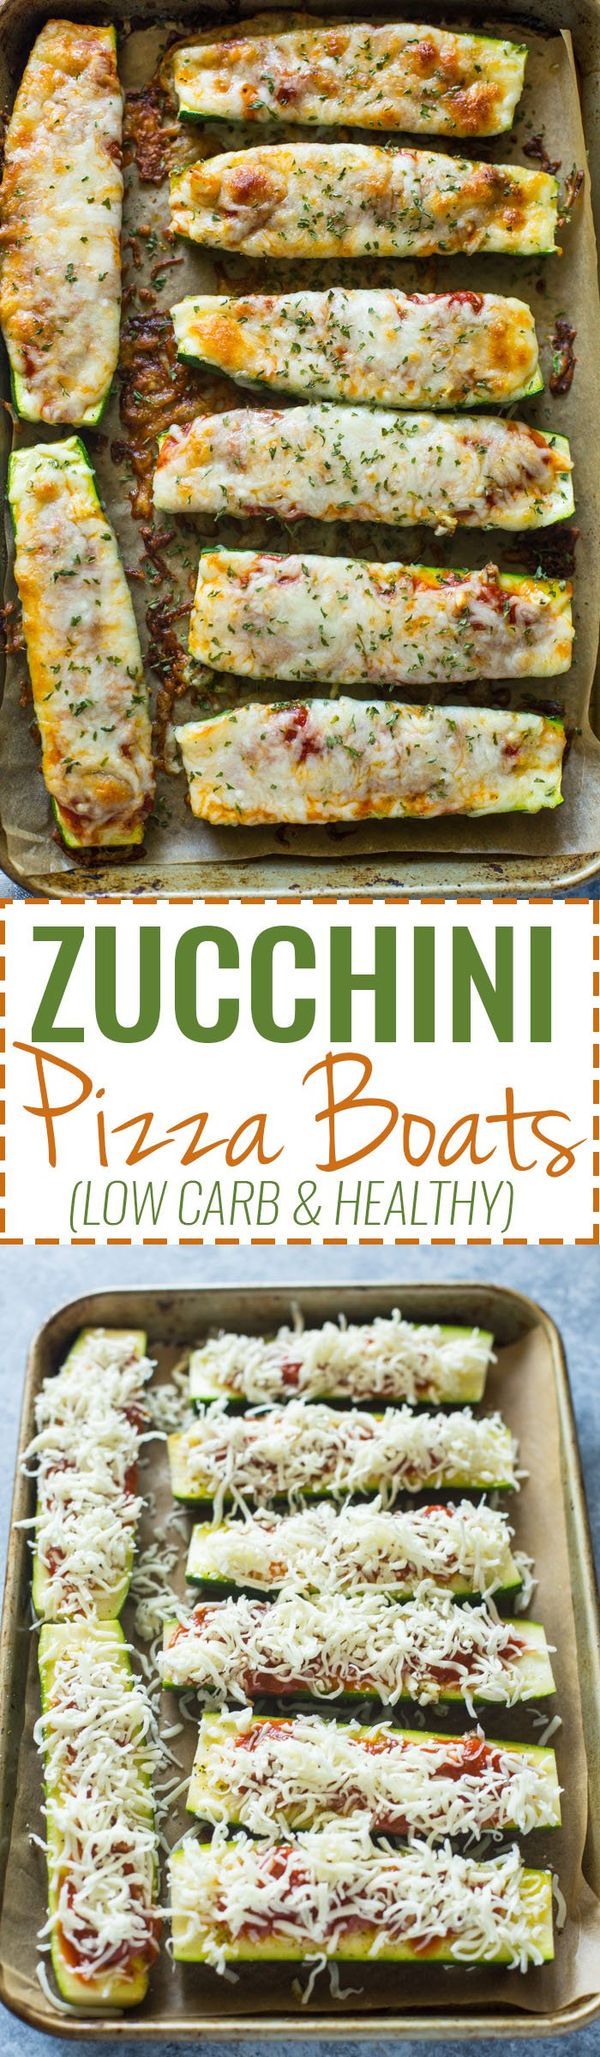 Low-Carb Zucchini Pizza Boats (VIDEO